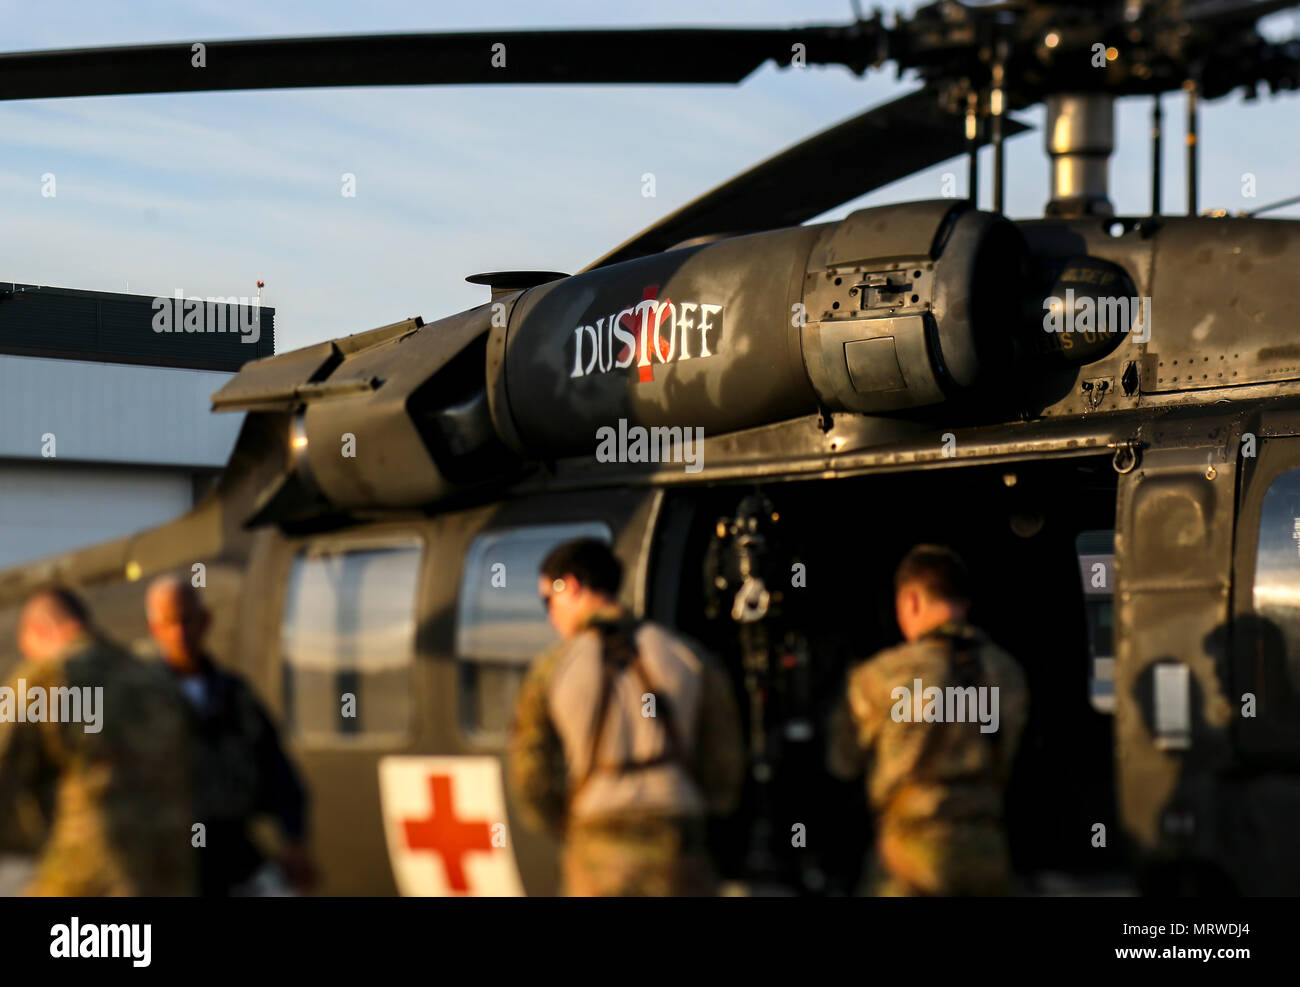 Members of New Jersey Task Force One are briefed on the hoist system on a UH-60 Black Hawk helicopter during joint training at Joint Base McGuire-Dix-Lakehurst, N.J., June 28, 2017. The primary mission of New Jersey Task Force One is to provide advanced technical search and rescue capabilities to victims trapped or entombed in structurally collapsed buildings. (U.S. Air National Guard photo by Master Sgt. Matt Hecht/Released) Stock Photo